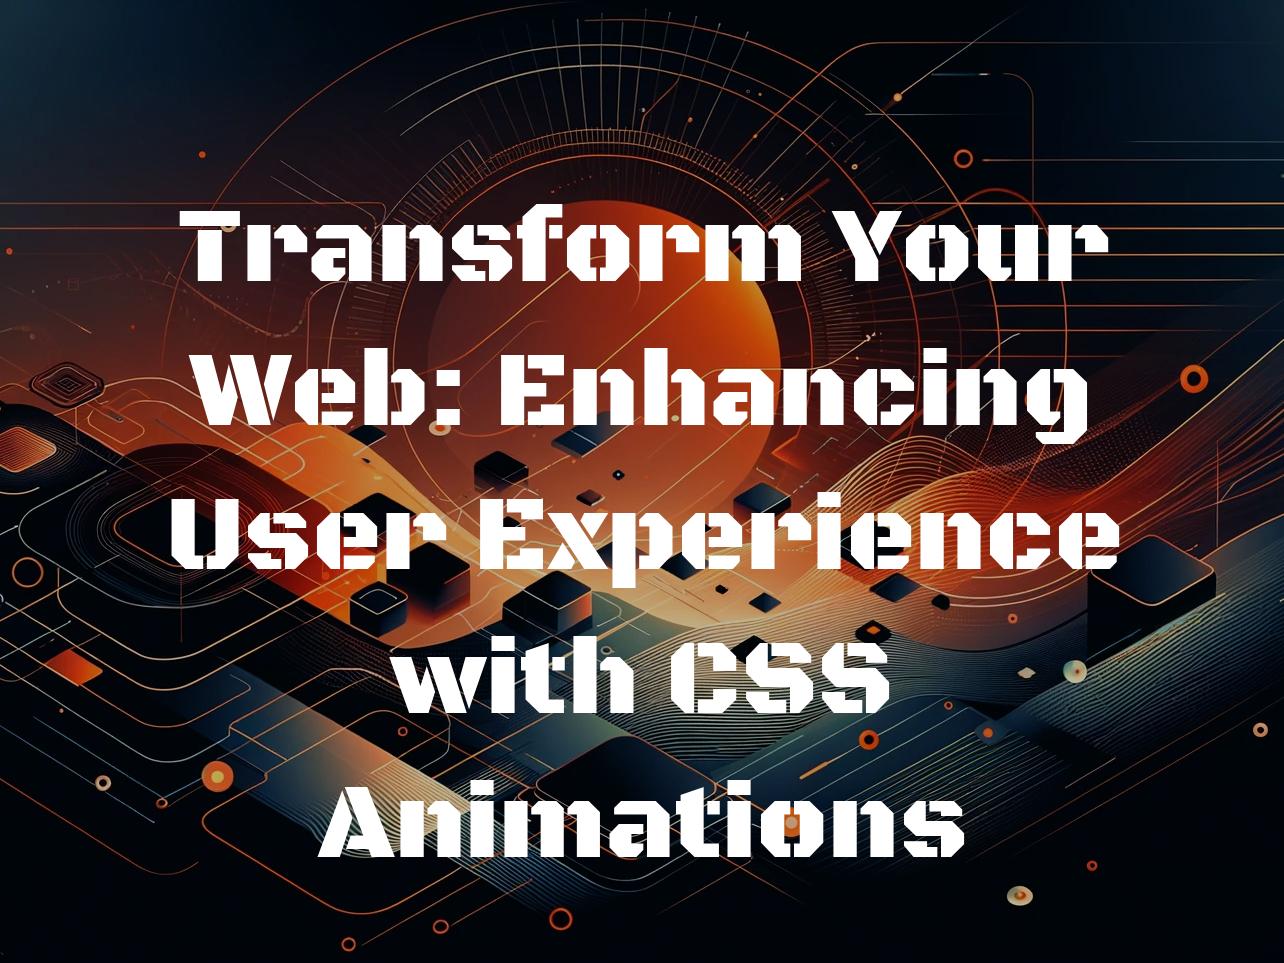 Transform Your Web: Enhancing User Experience with CSS Animations